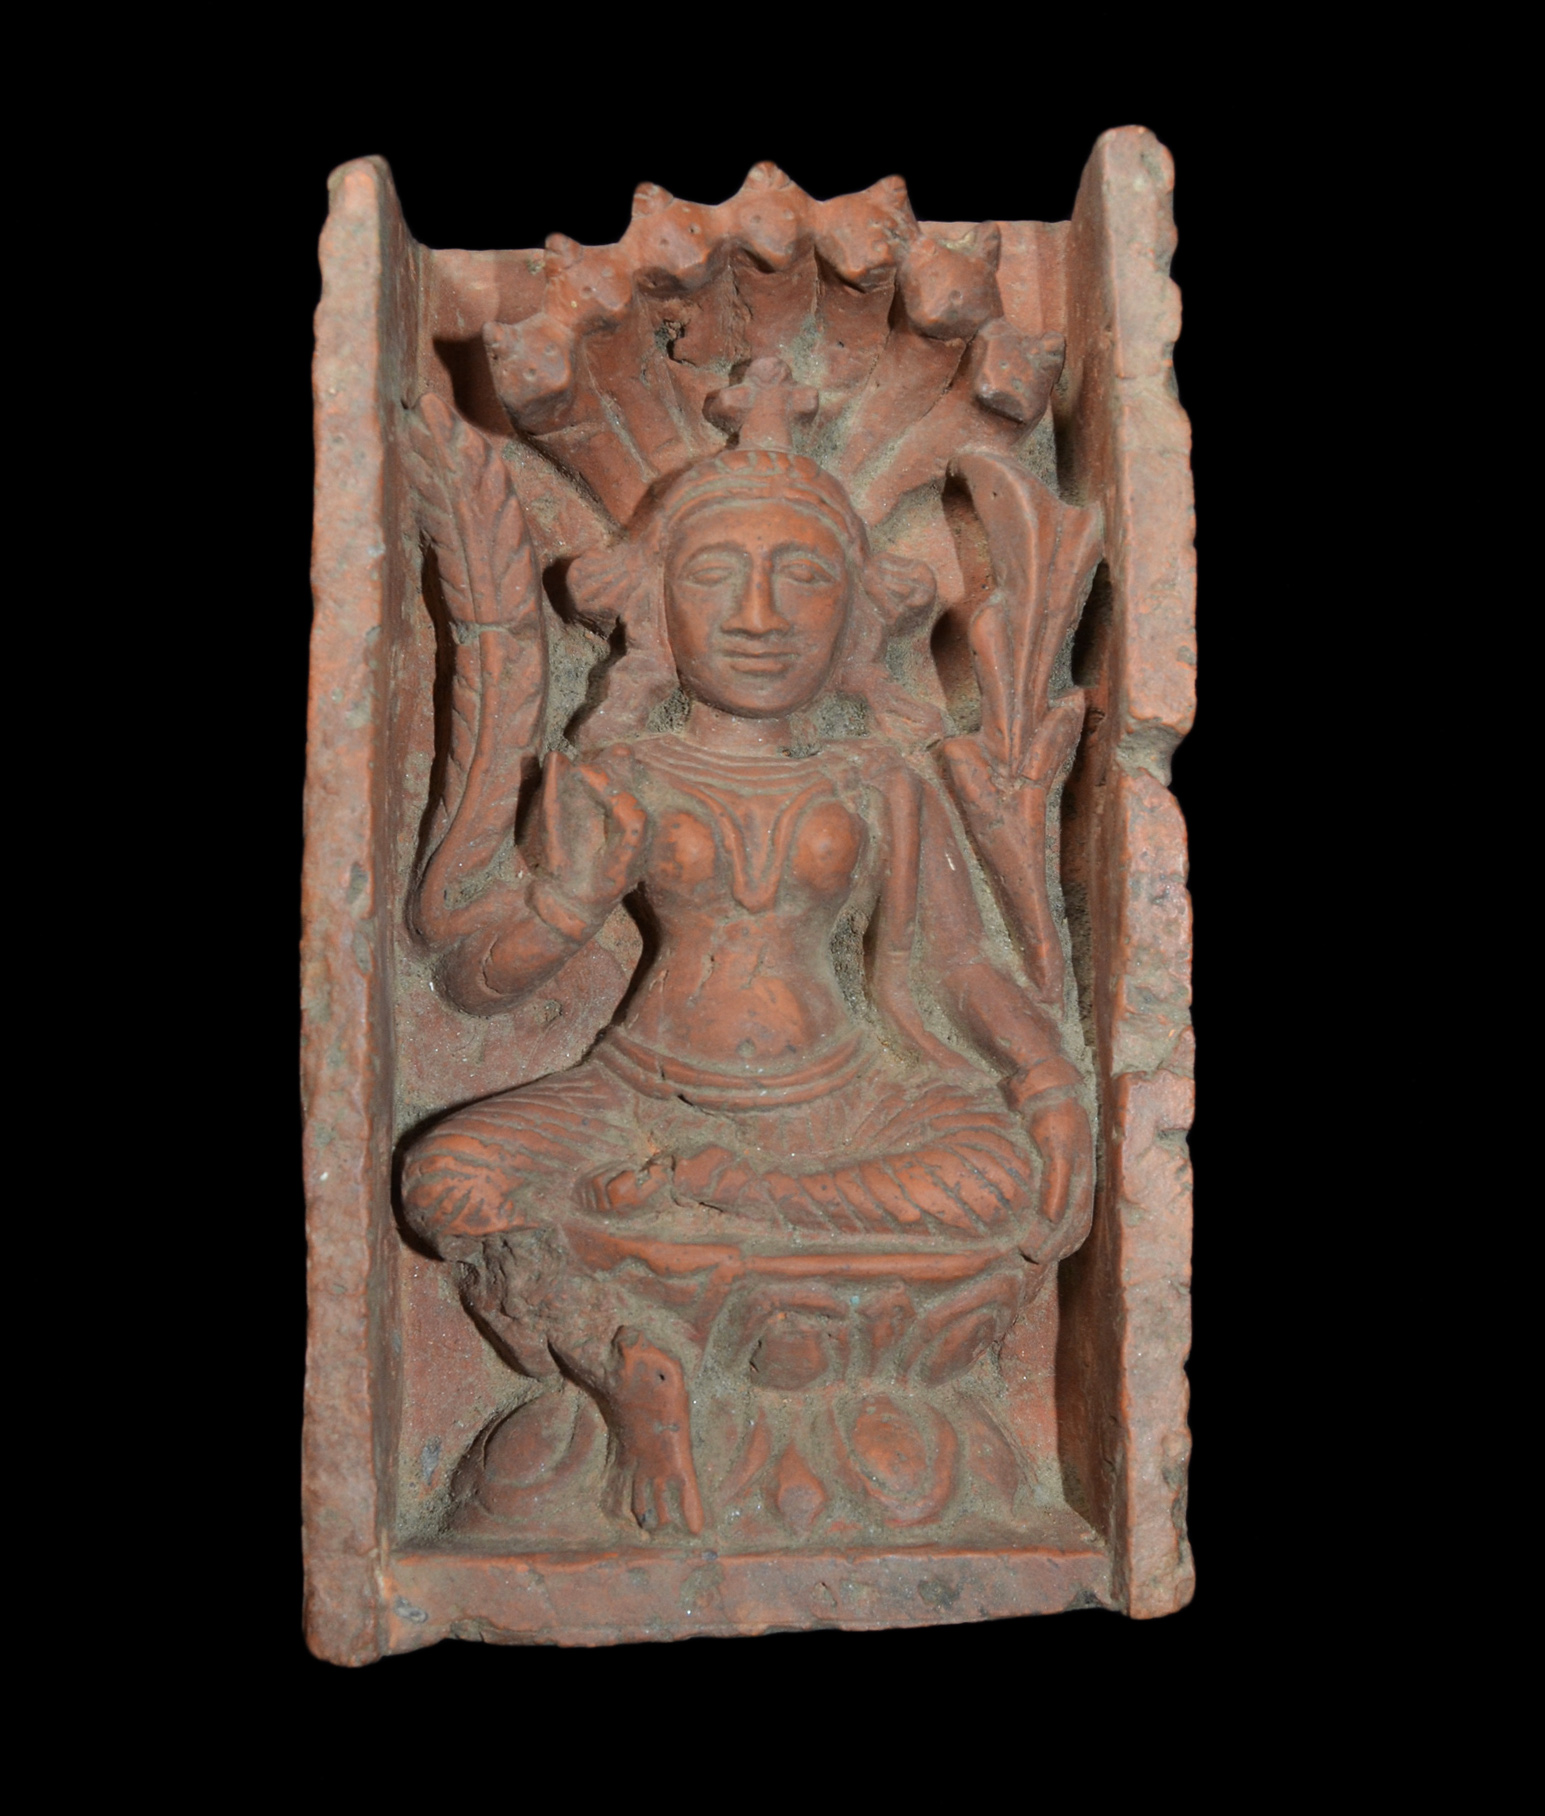 Clay Votive Temple Tile depicting the Deity Manasa West Bengal India 13th-16th Century